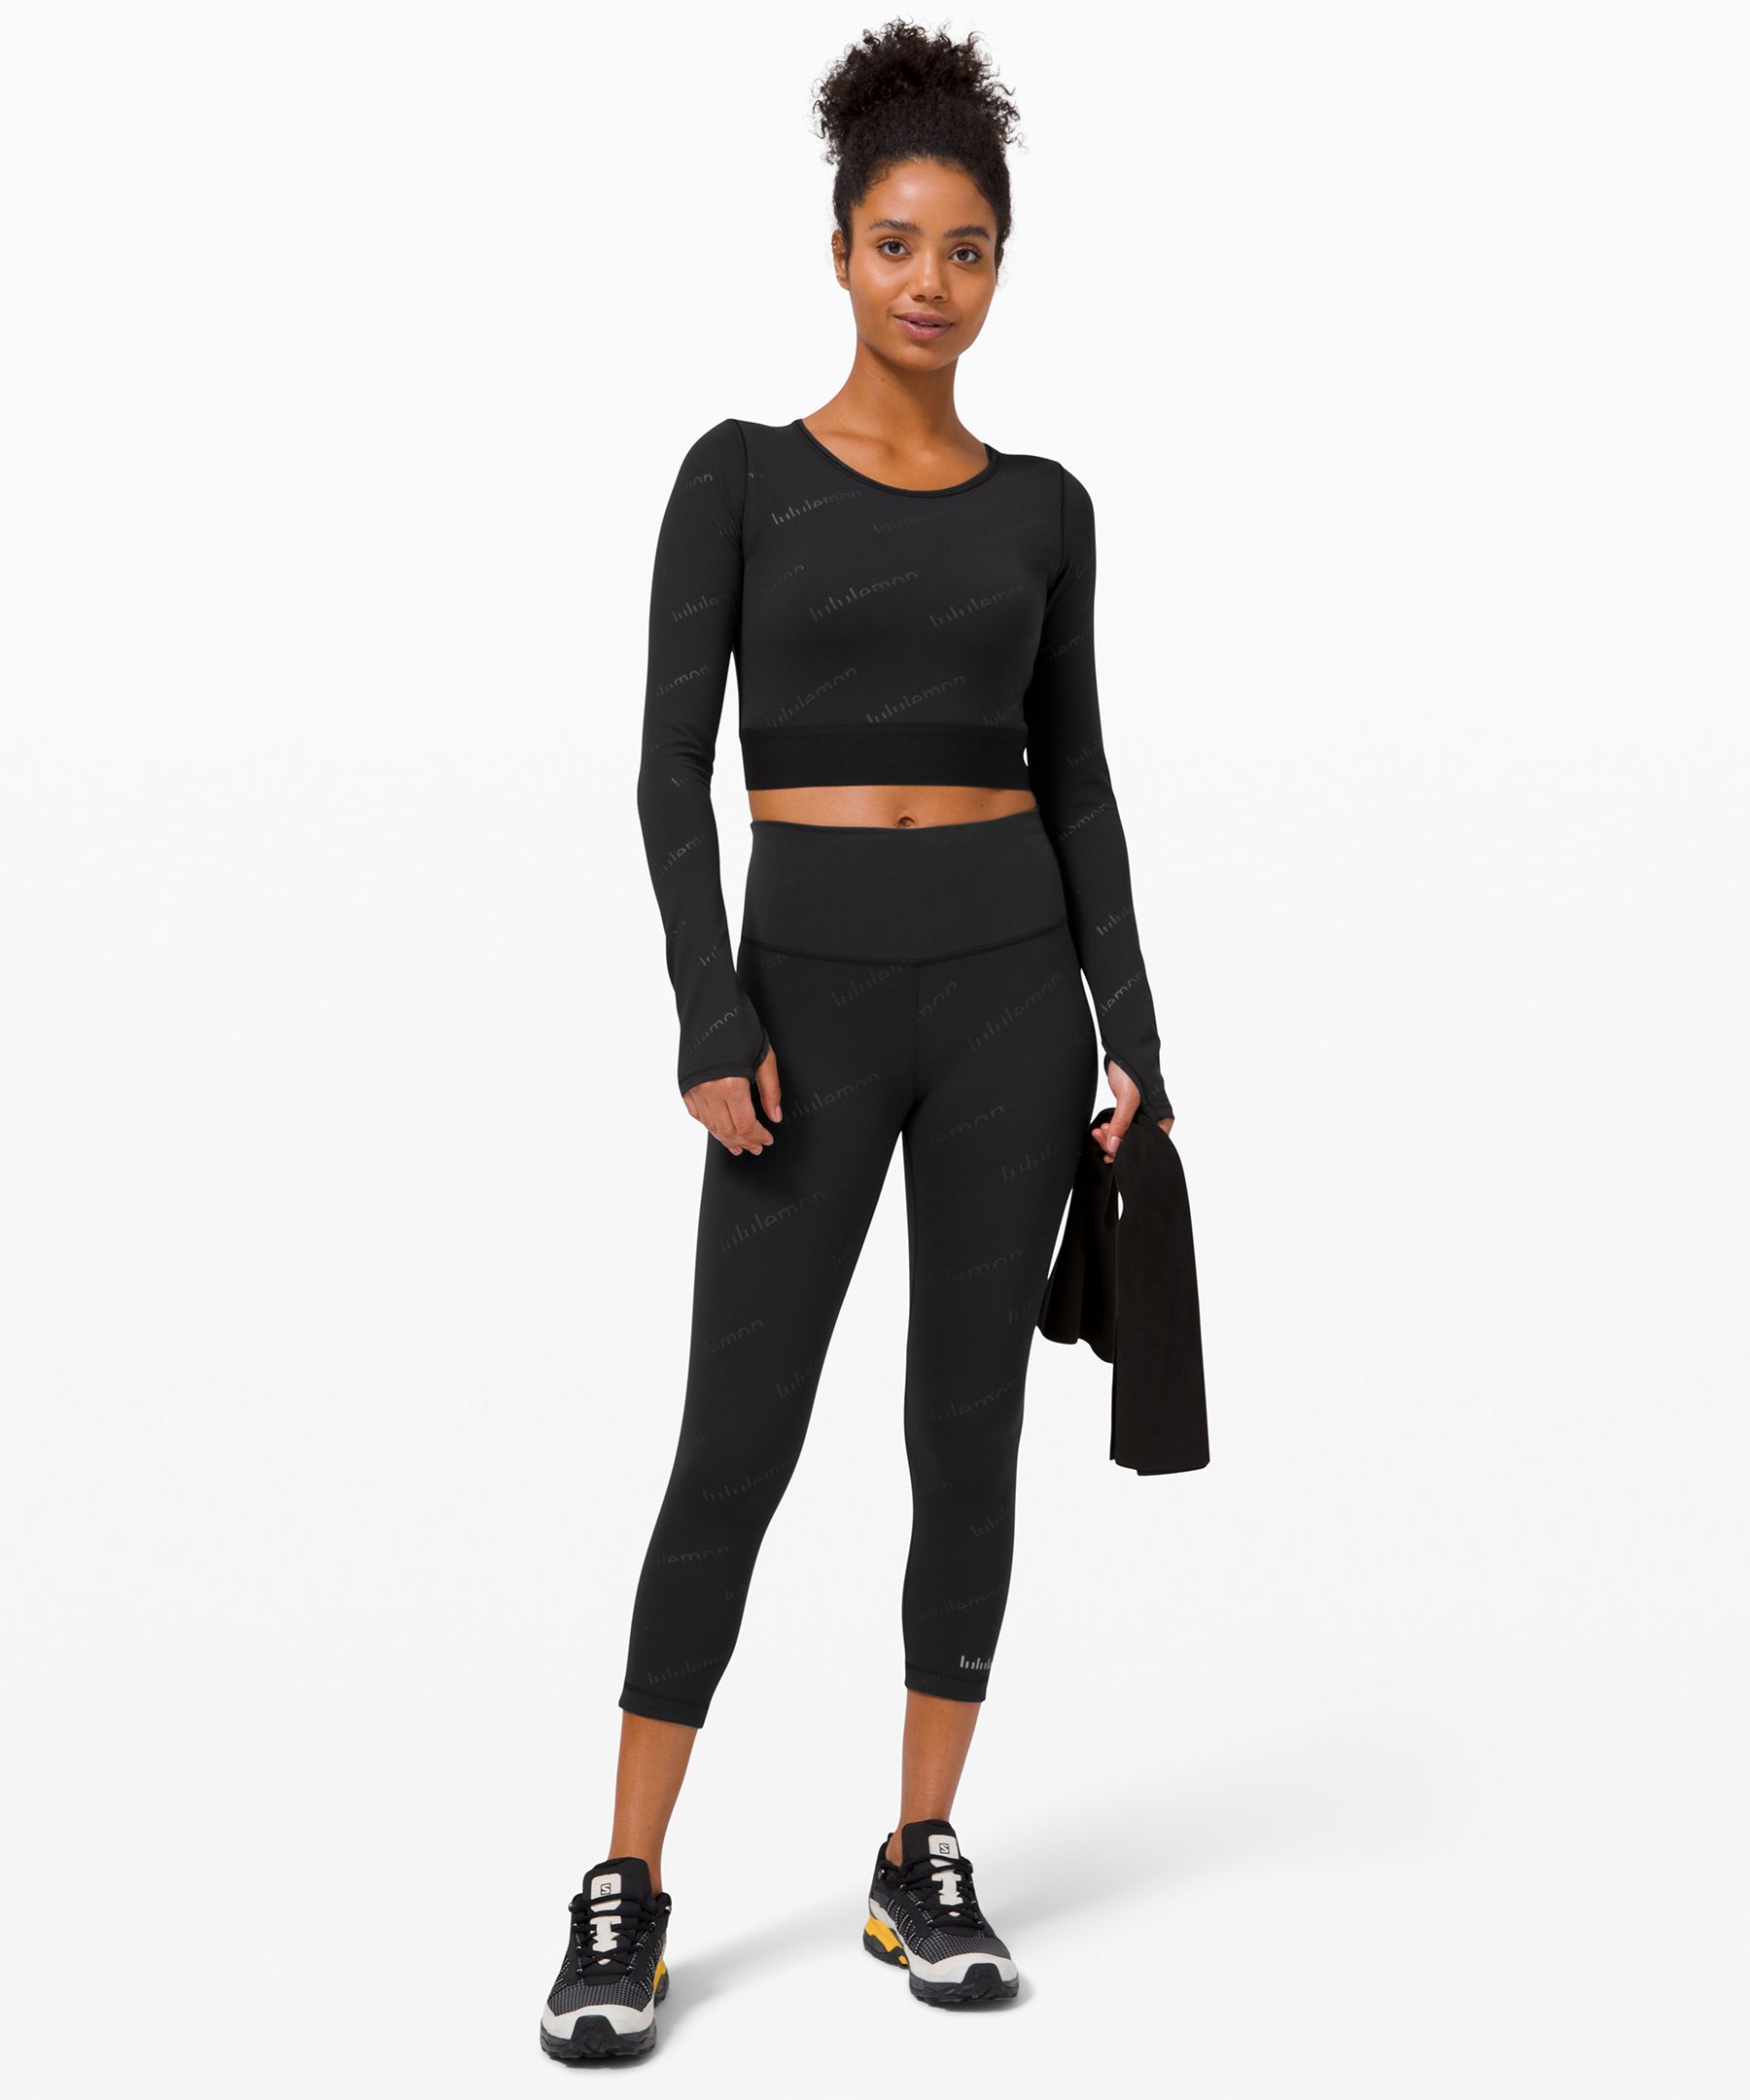 Yogo Embossed Align try on - thoughts? : r/lululemon